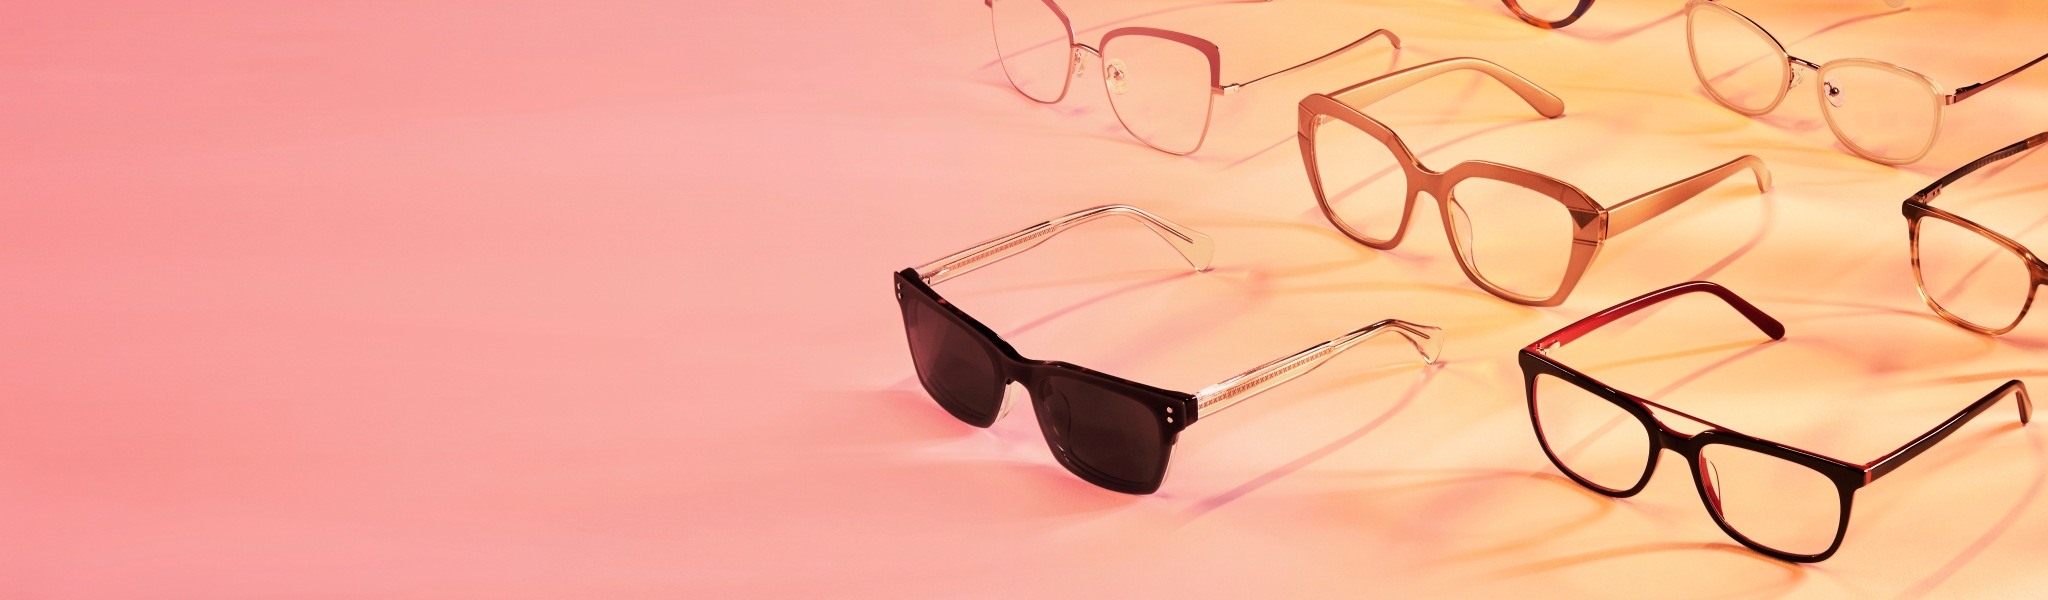 Image of several pairs of Zenni glasses against a peach-orange background.